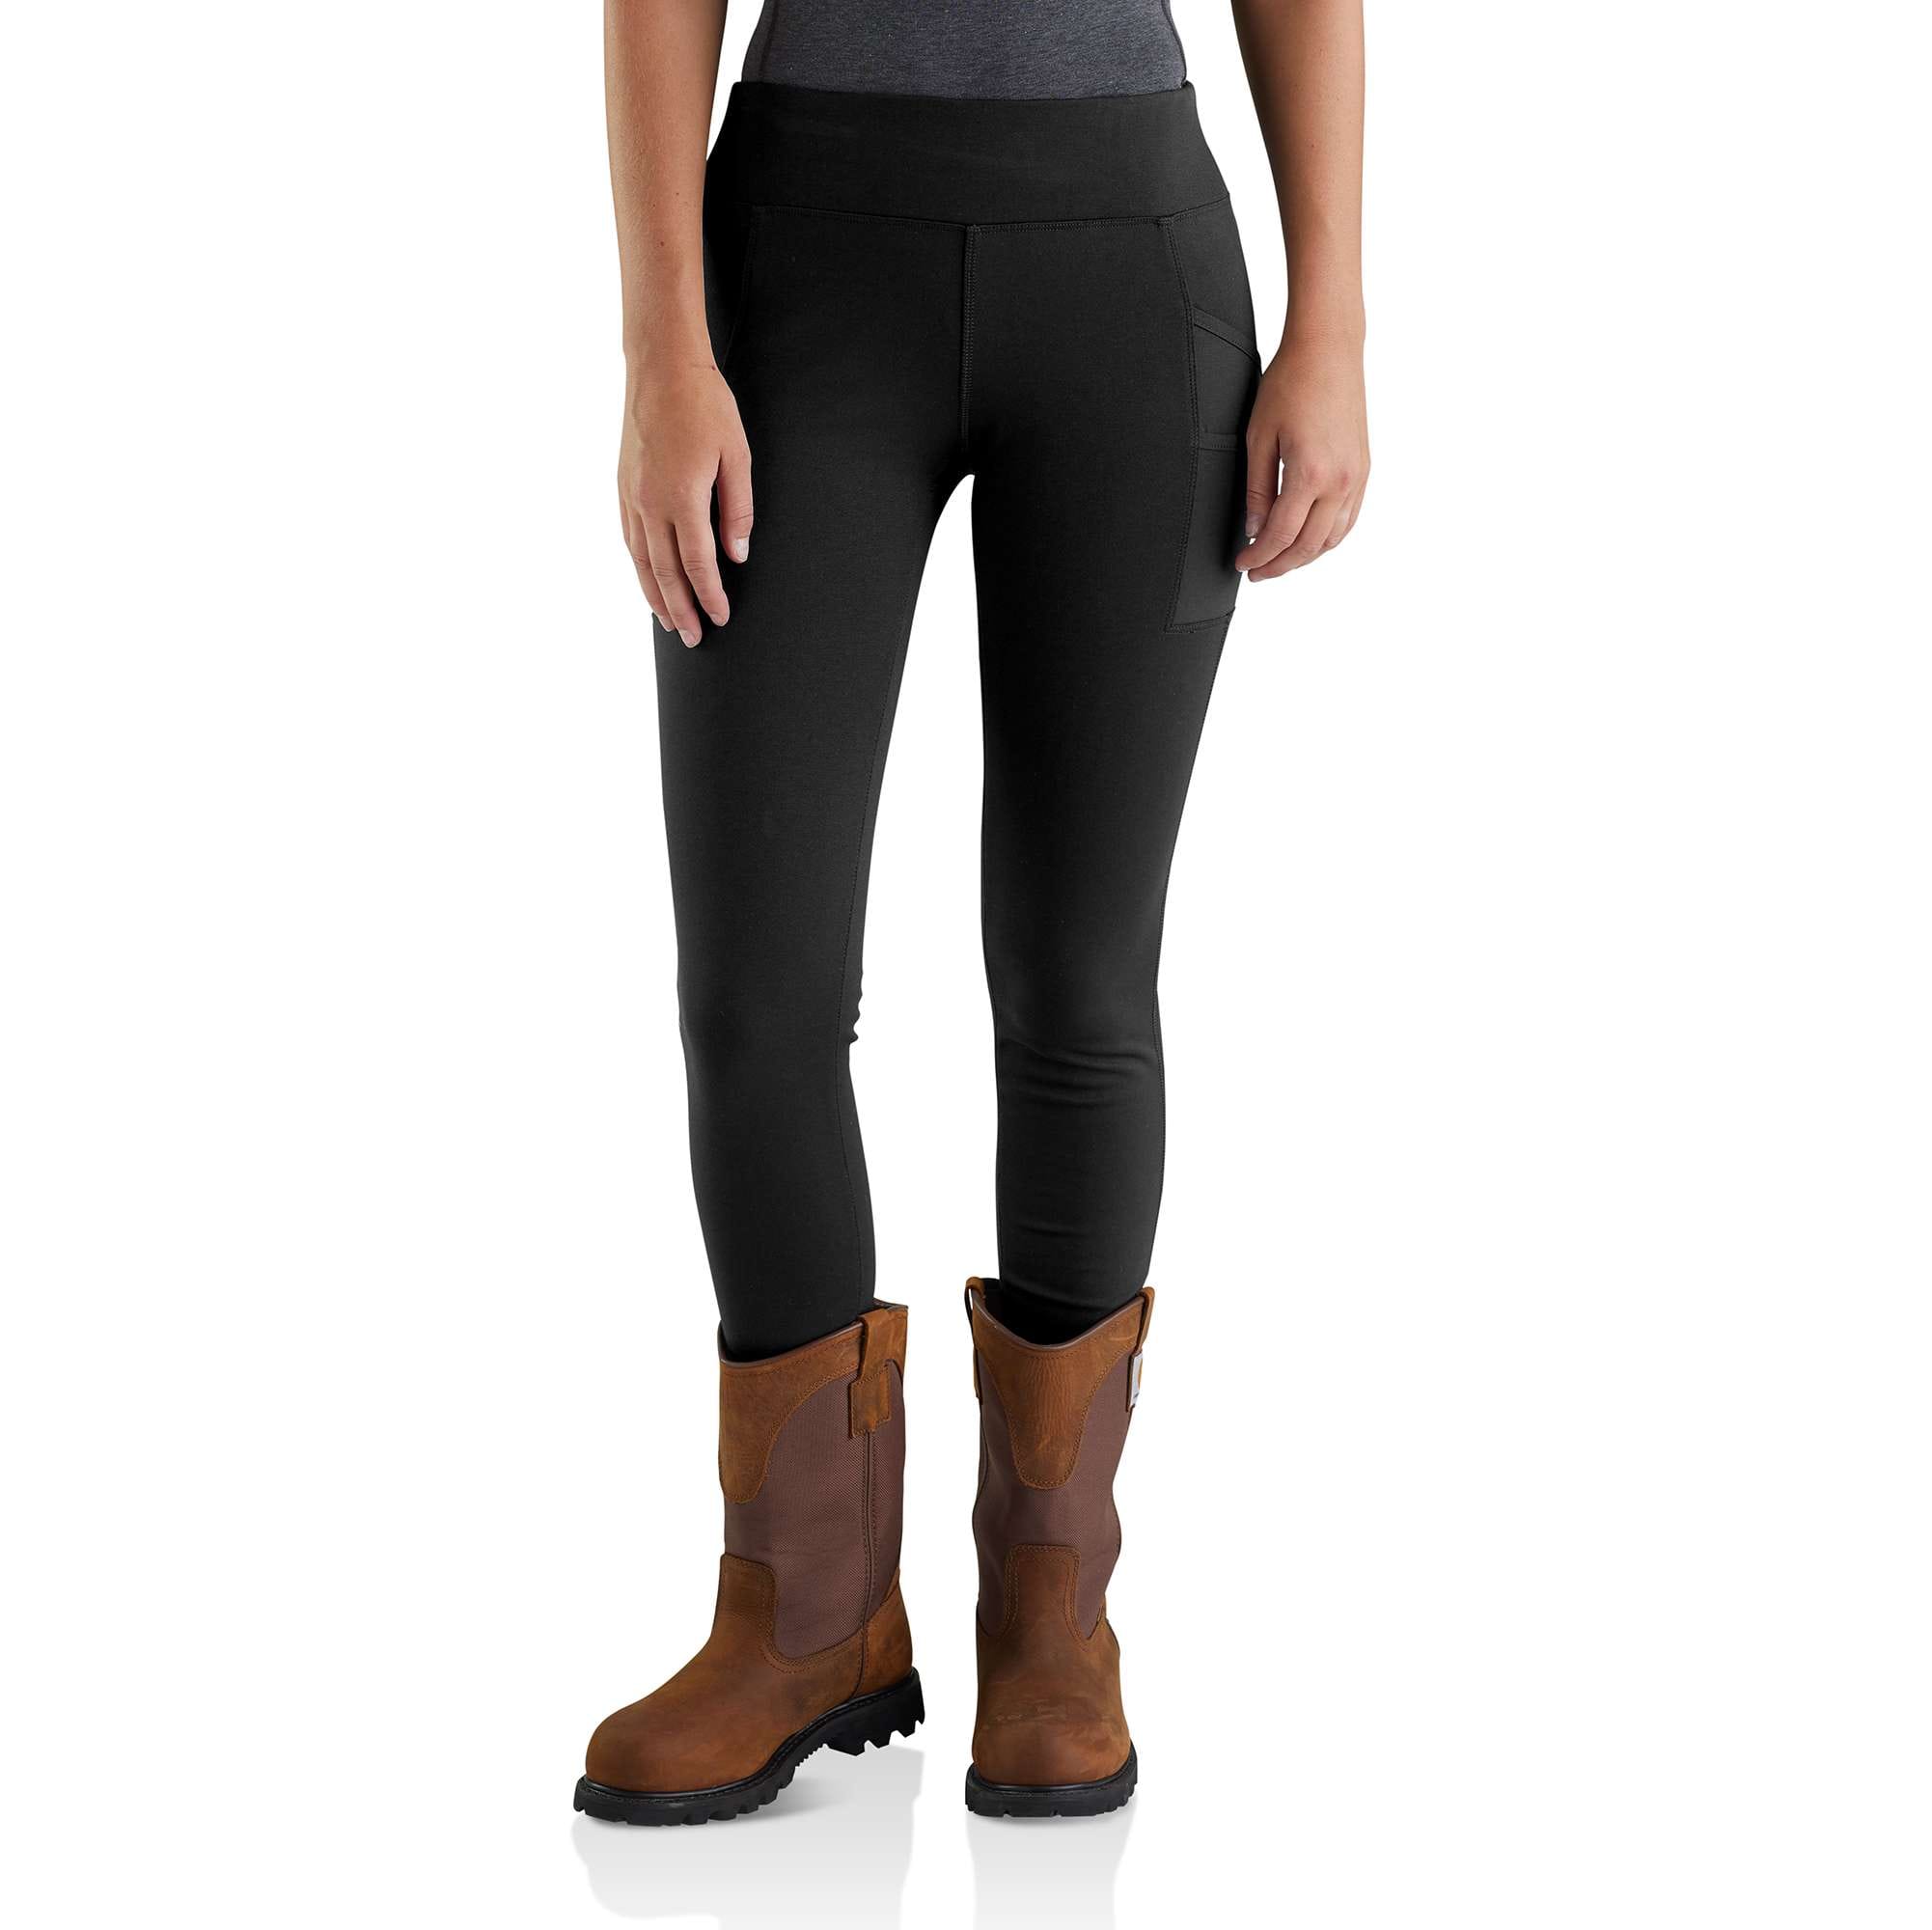 13 Things You Can Do in Carhartt Utility Leggings